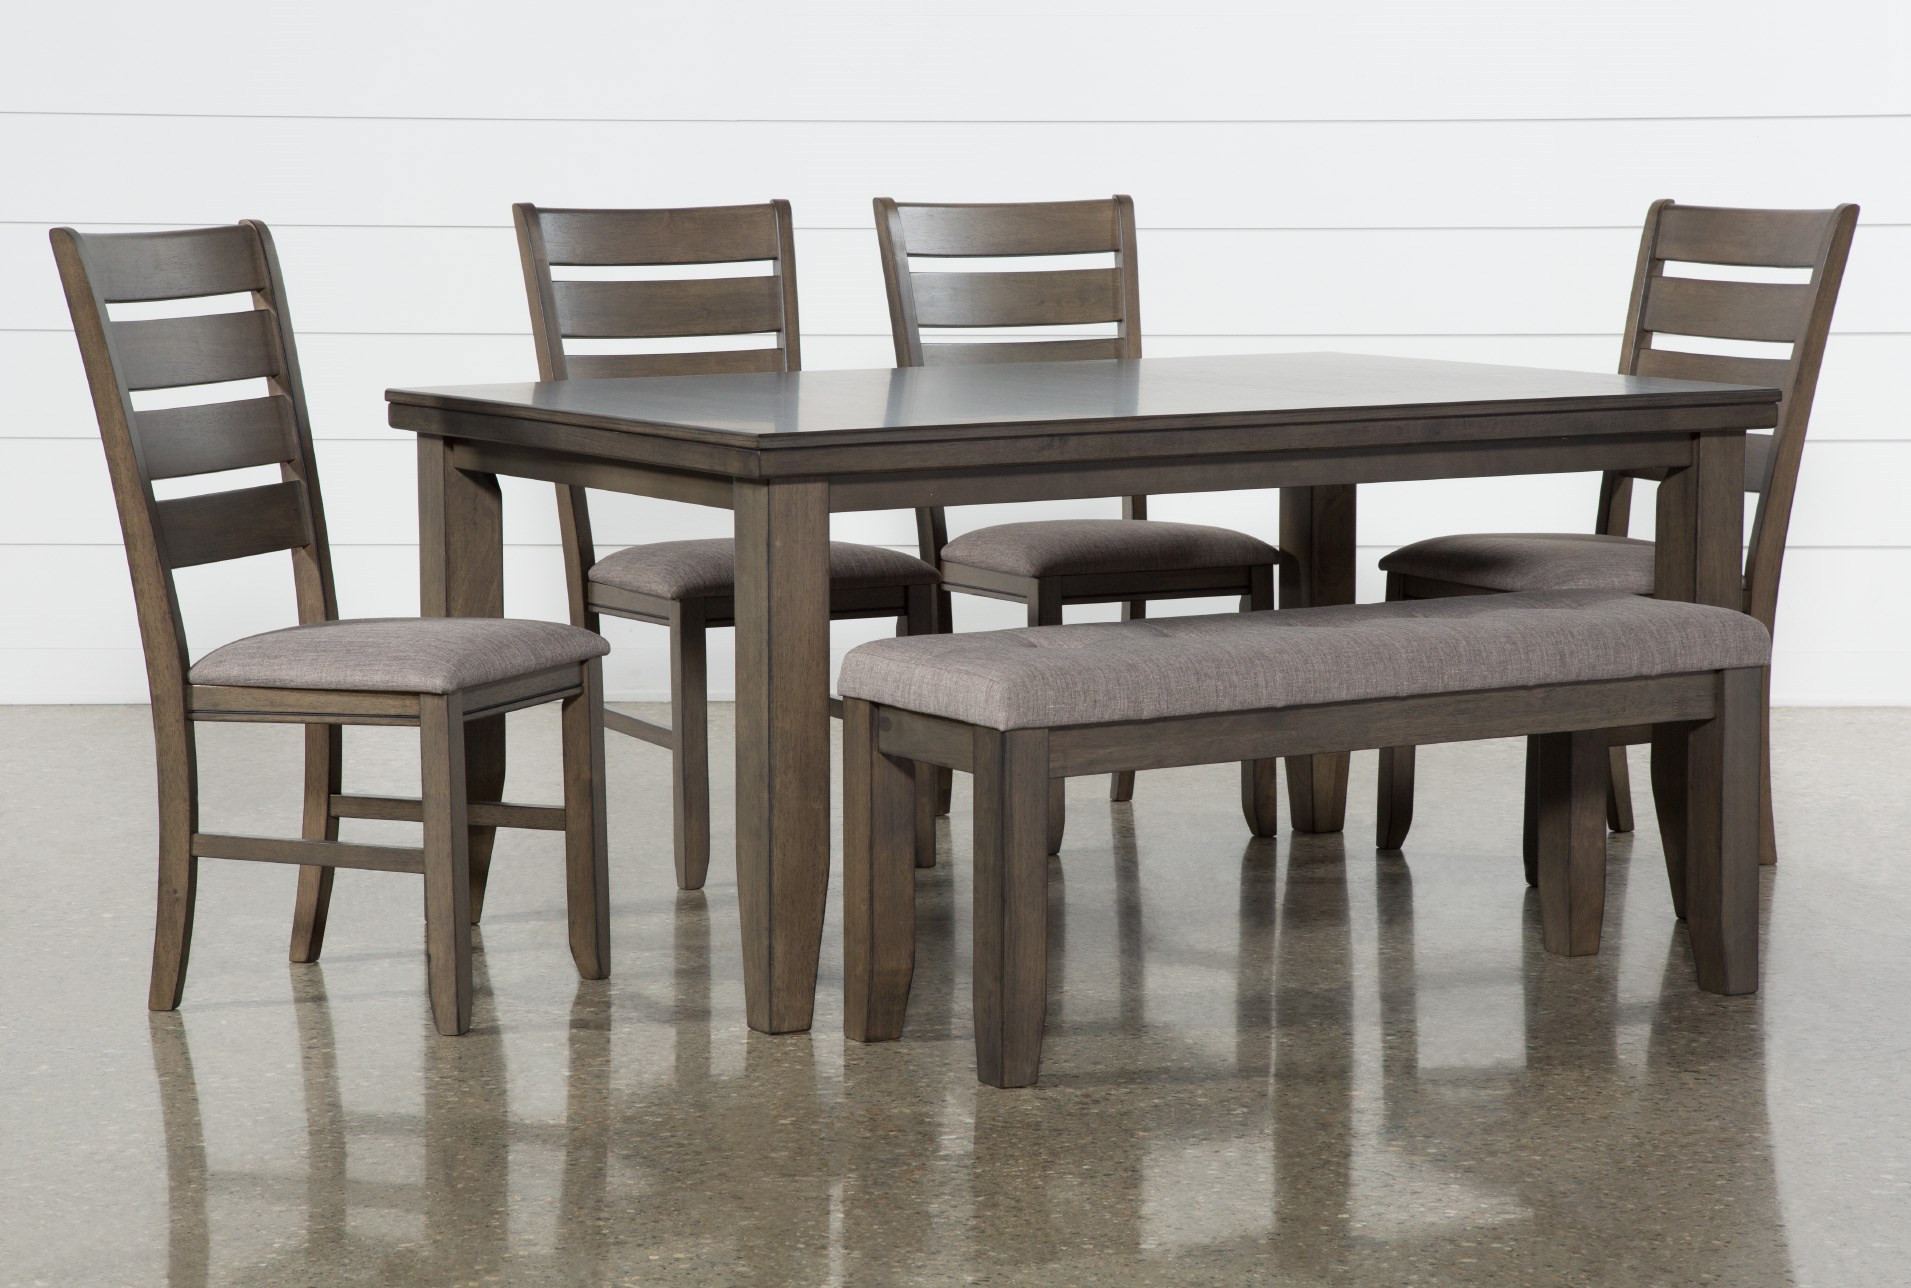 Living Spaces Dining Table Set
 Ashford II 6 Piece Dining Set